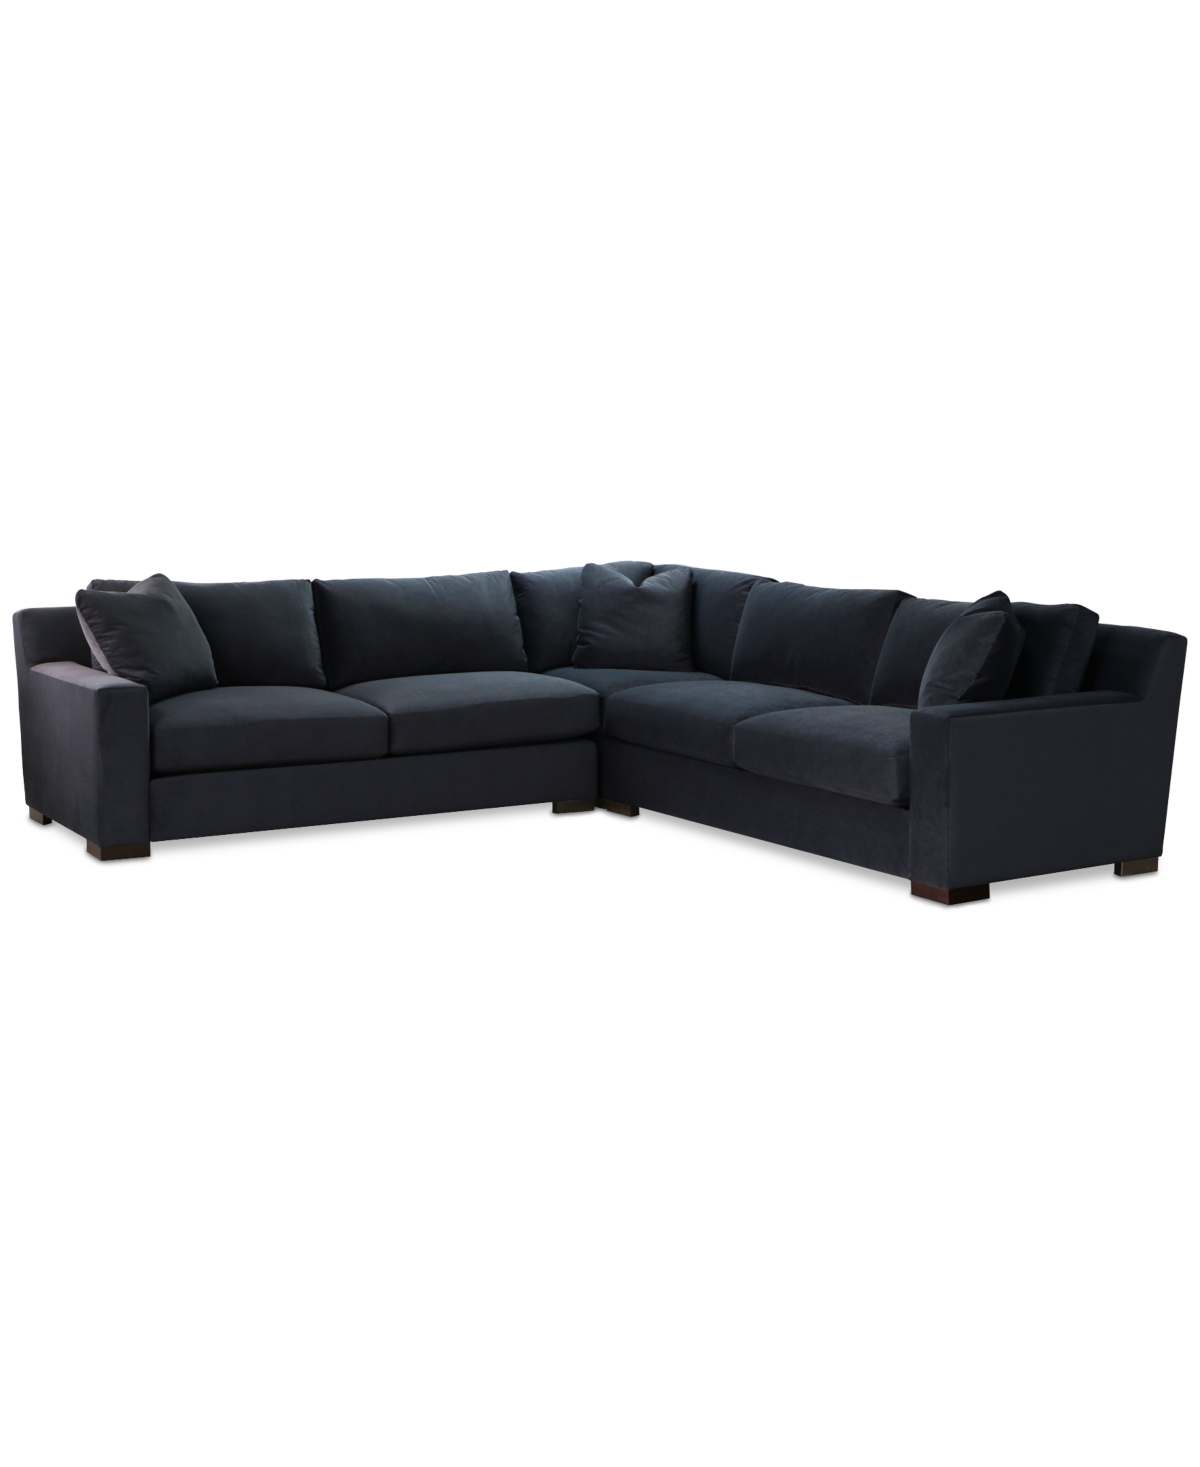 Furniture Marristin 123" 3-pc. Fabric L Sectional, Created For Macy's In Charcoal